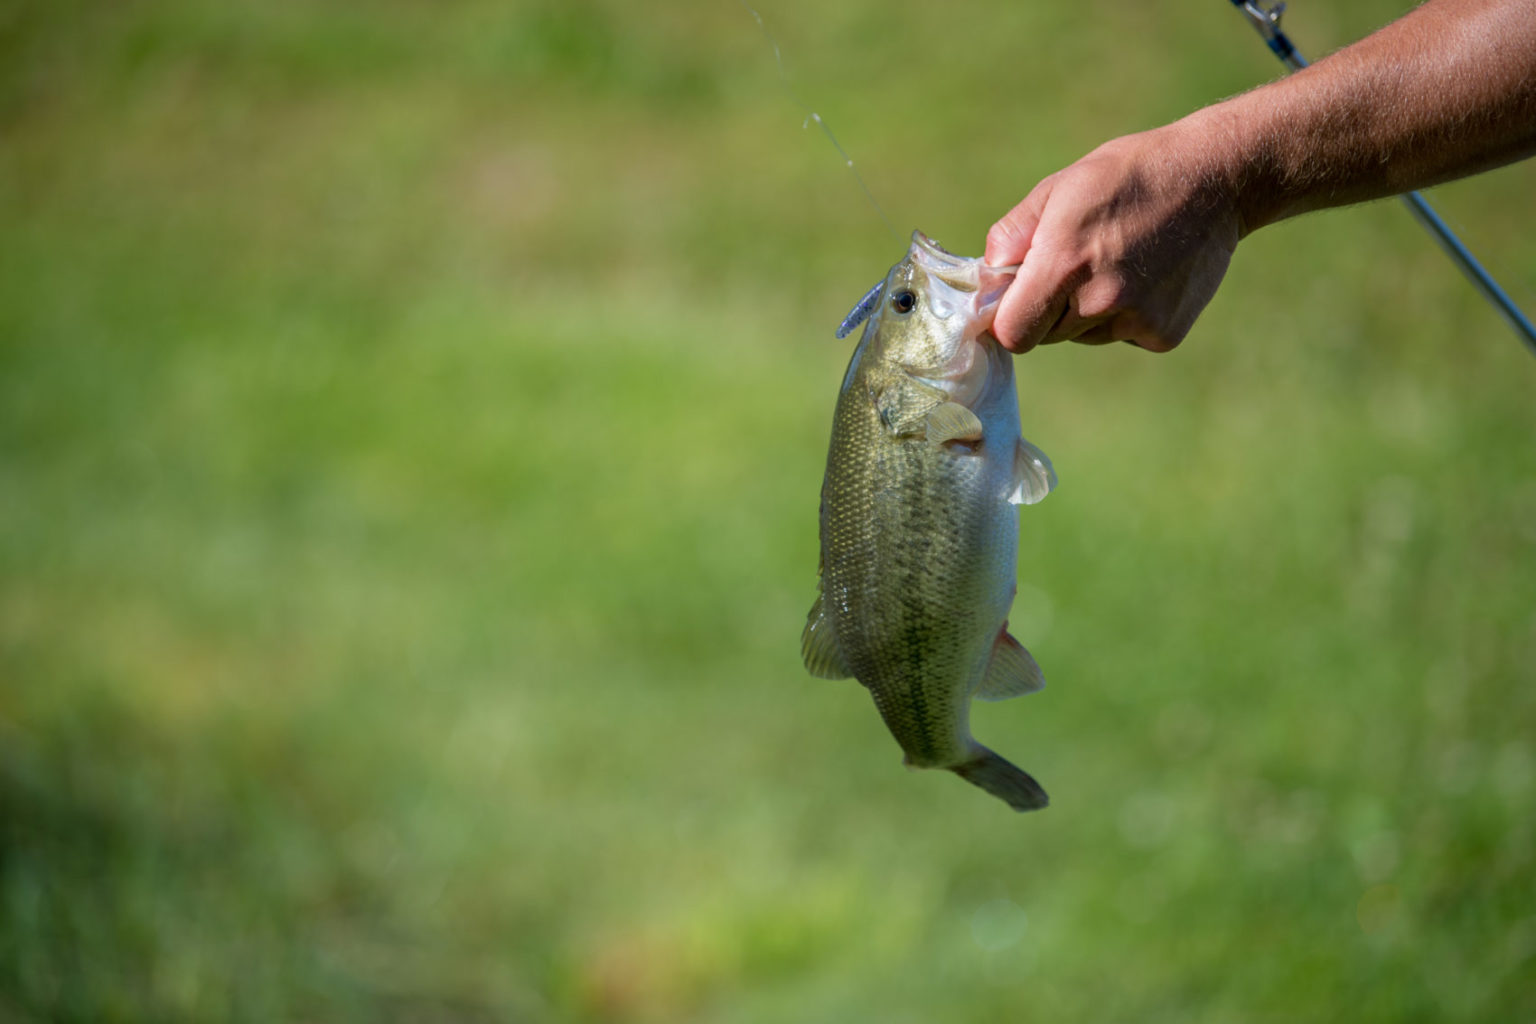 Catch the Fun on Free Fishing Day in the Southeast Region